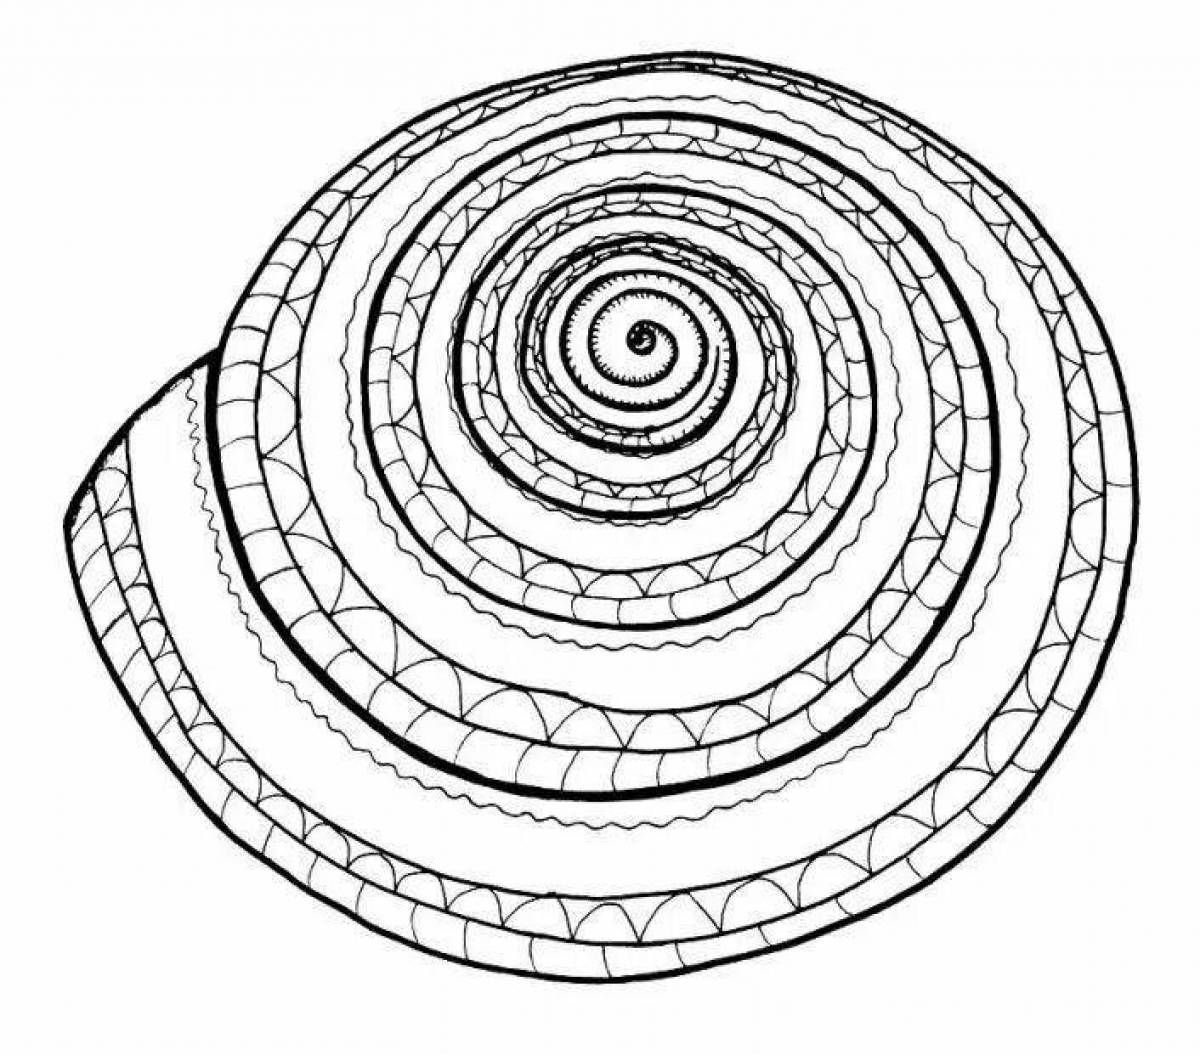 Amazing helix coloring page